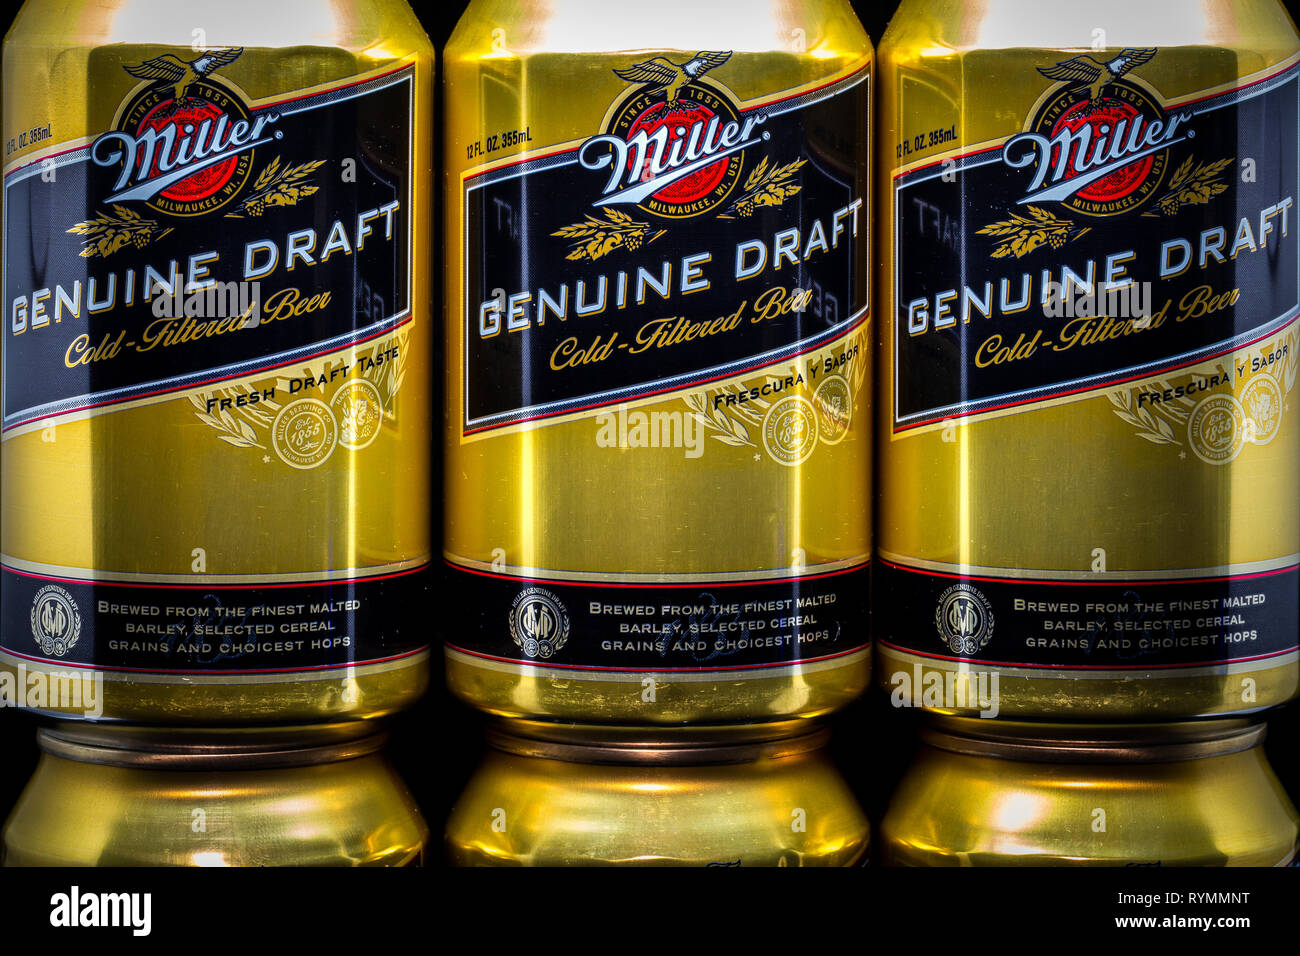 ST. PAUL, MN/USA - MARCH 6, 2019: Miller Genuine Draft beer and trademark logo. The Miller Brewing Company is an American beer brewing company. Stock Photo